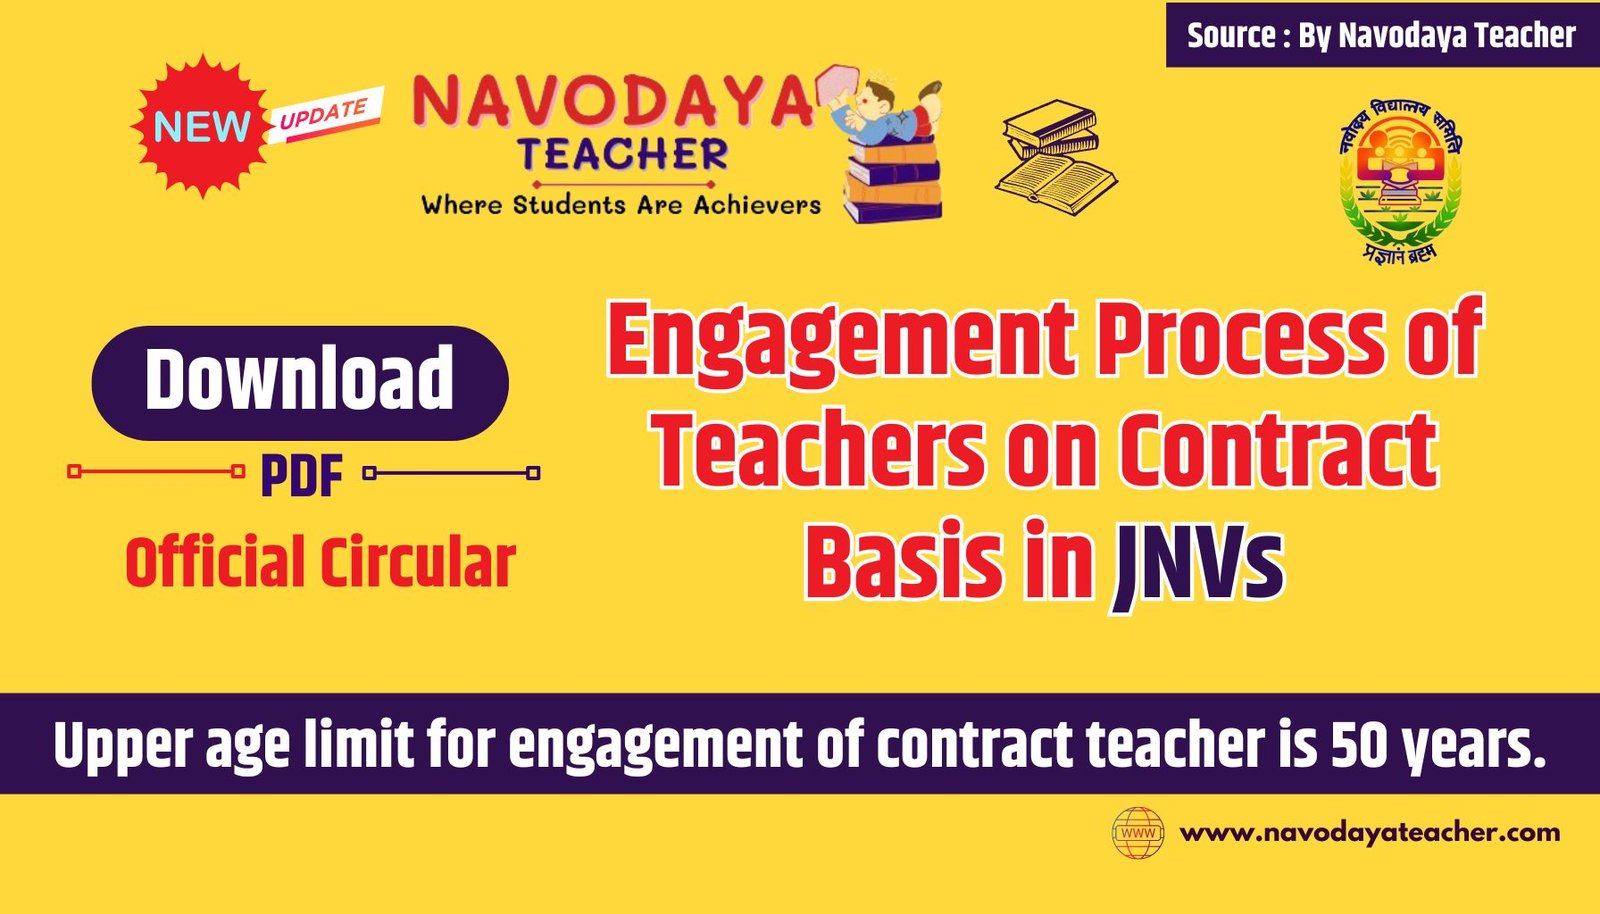 Engagement Process of Teachers on Contract Basis in JNVs